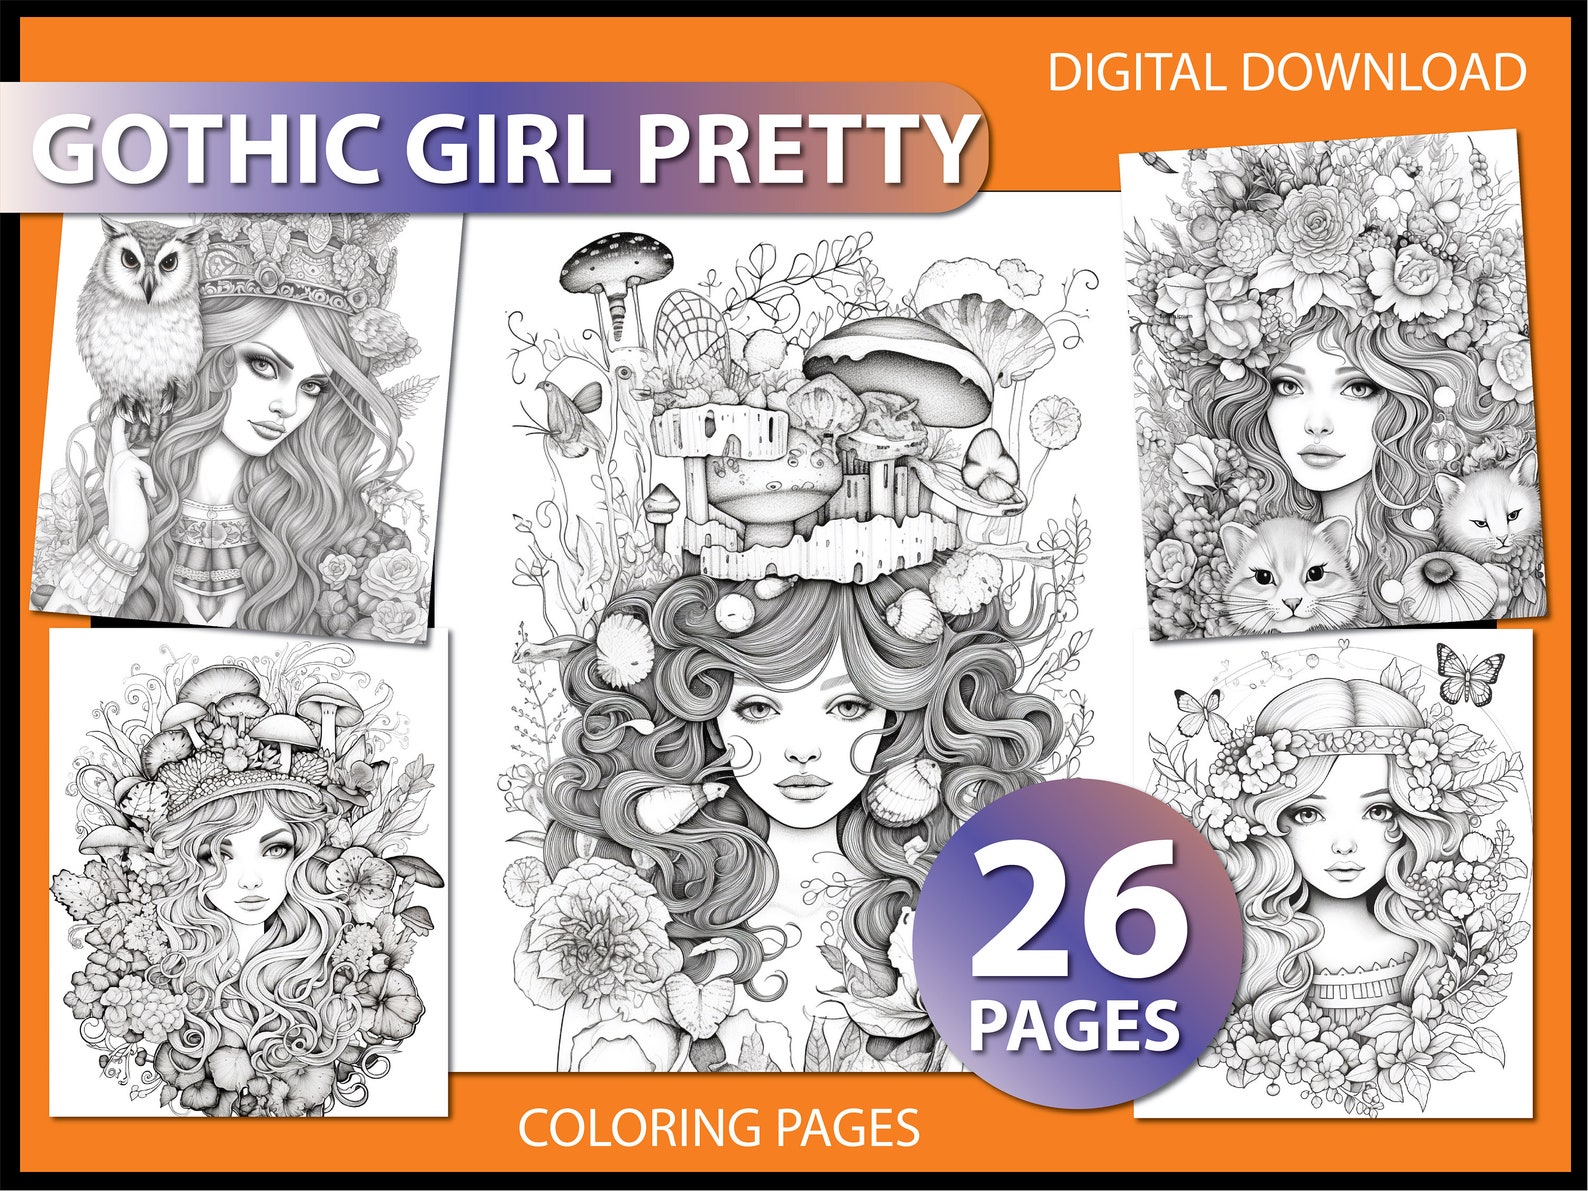 Gothic Girl Pretty Coloring Pages for Adult Coloring Book - Etsy